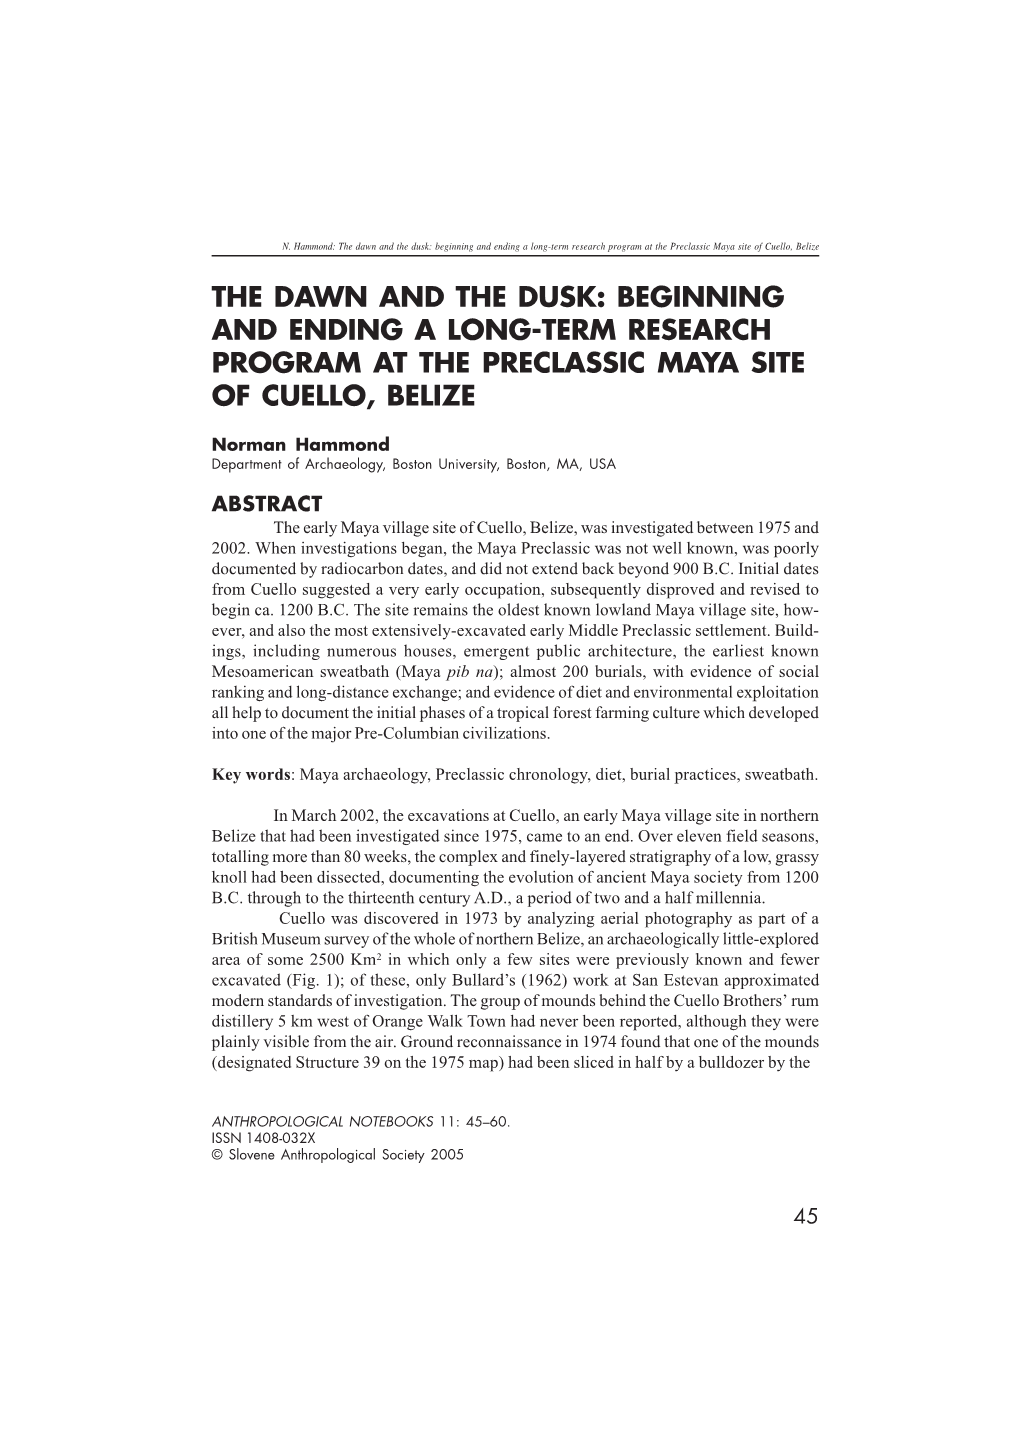 The Dawn and the Dusk: Beginning and Ending a Long-Term Research Program at the Preclassic Maya Site of Cuello, Belize